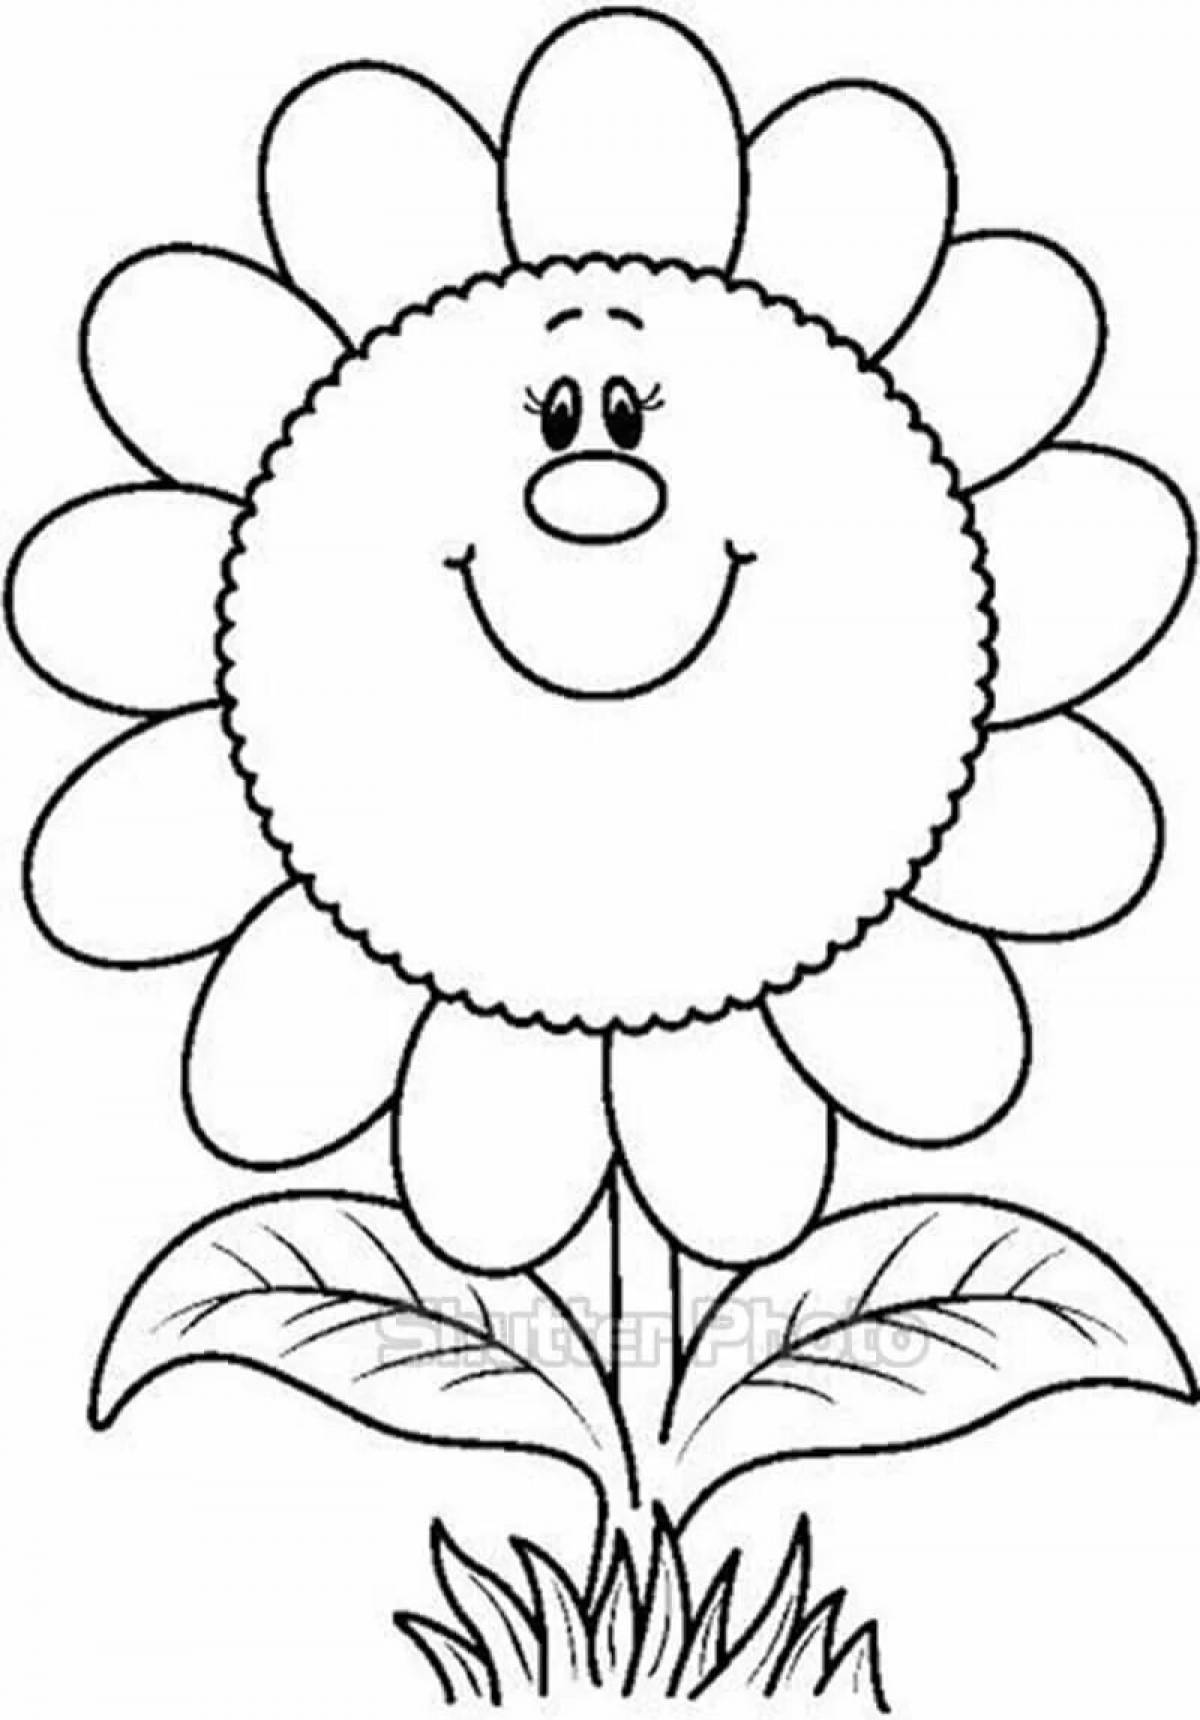 Exciting flower drawing for kids